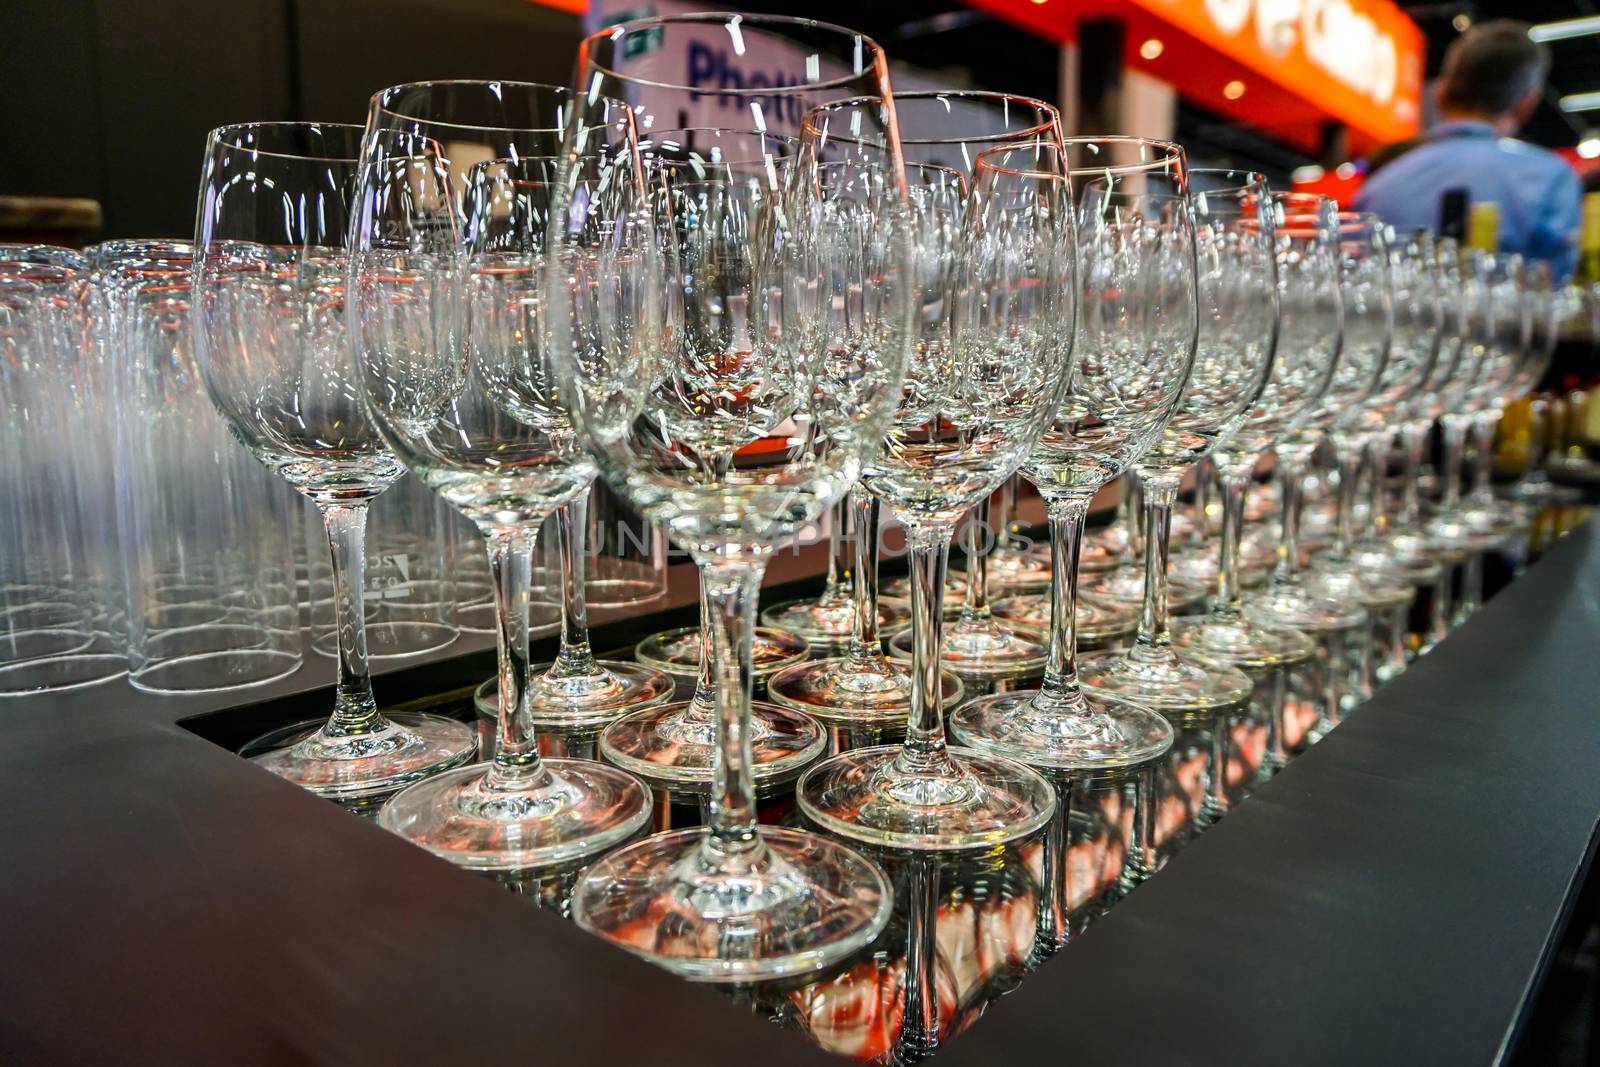 COLOGNE, GERMANY - SEPTEMBER 21, 2016: Photokina Exhibition interior. The Photokina is the world's largest trade fair for the photographic and imaging industries. Wine glasses in reataurant at the Photokina Exhibition. 